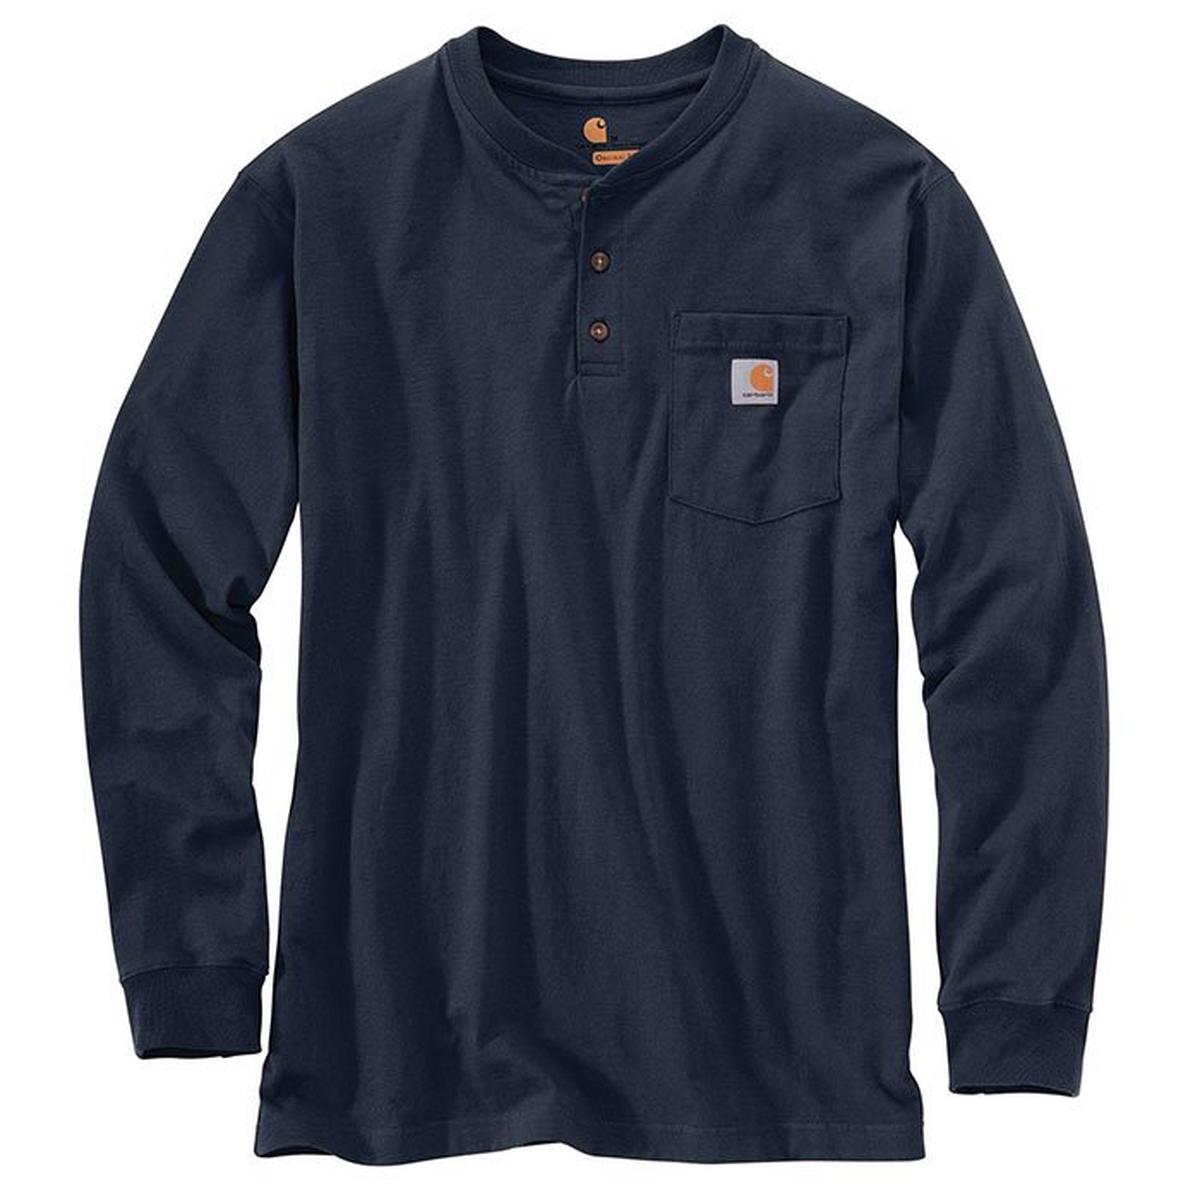 Chandail henley Workwear pour hommes